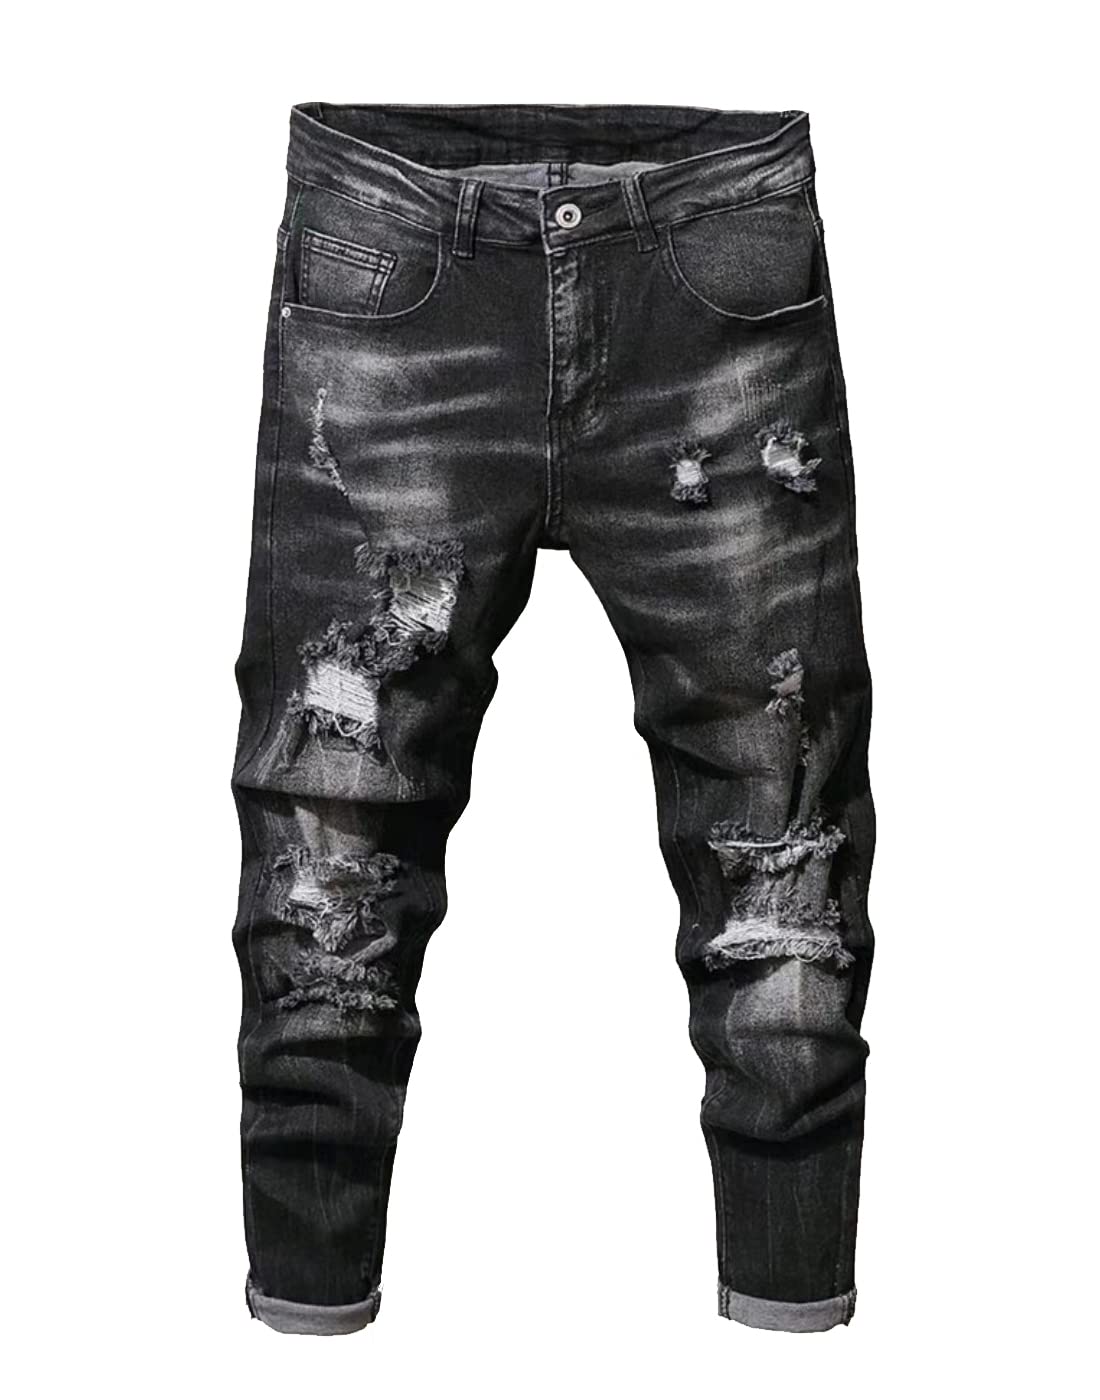 Boy's Skinny Fit Ripped Destroyed Distressed Stretch Slim Jeans Pants